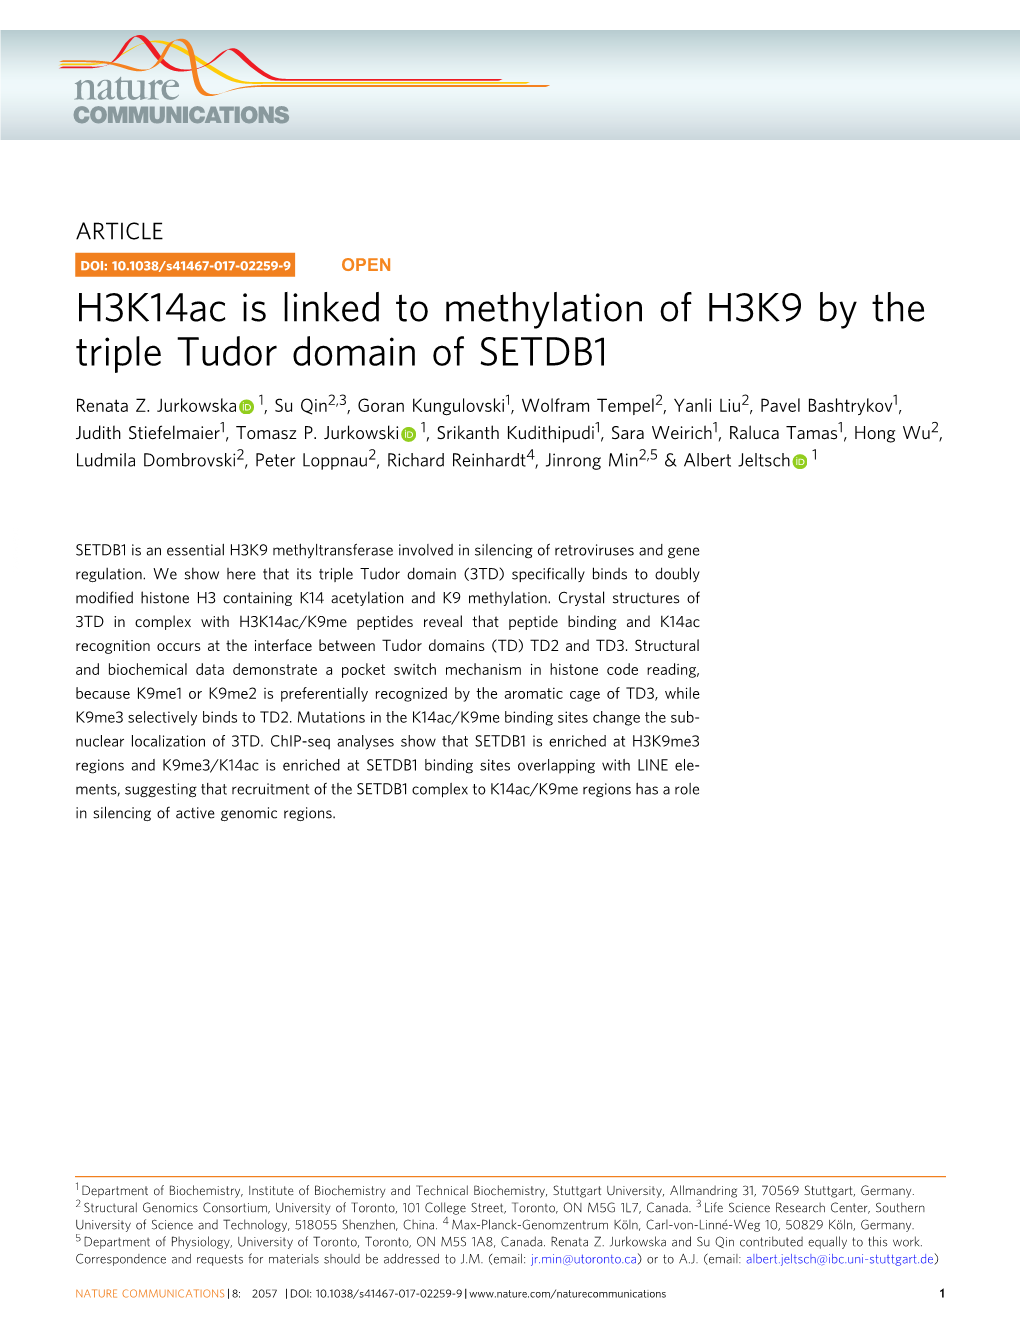 H3k14ac Is Linked to Methylation of H3K9 by the Triple Tudor Domain of SETDB1